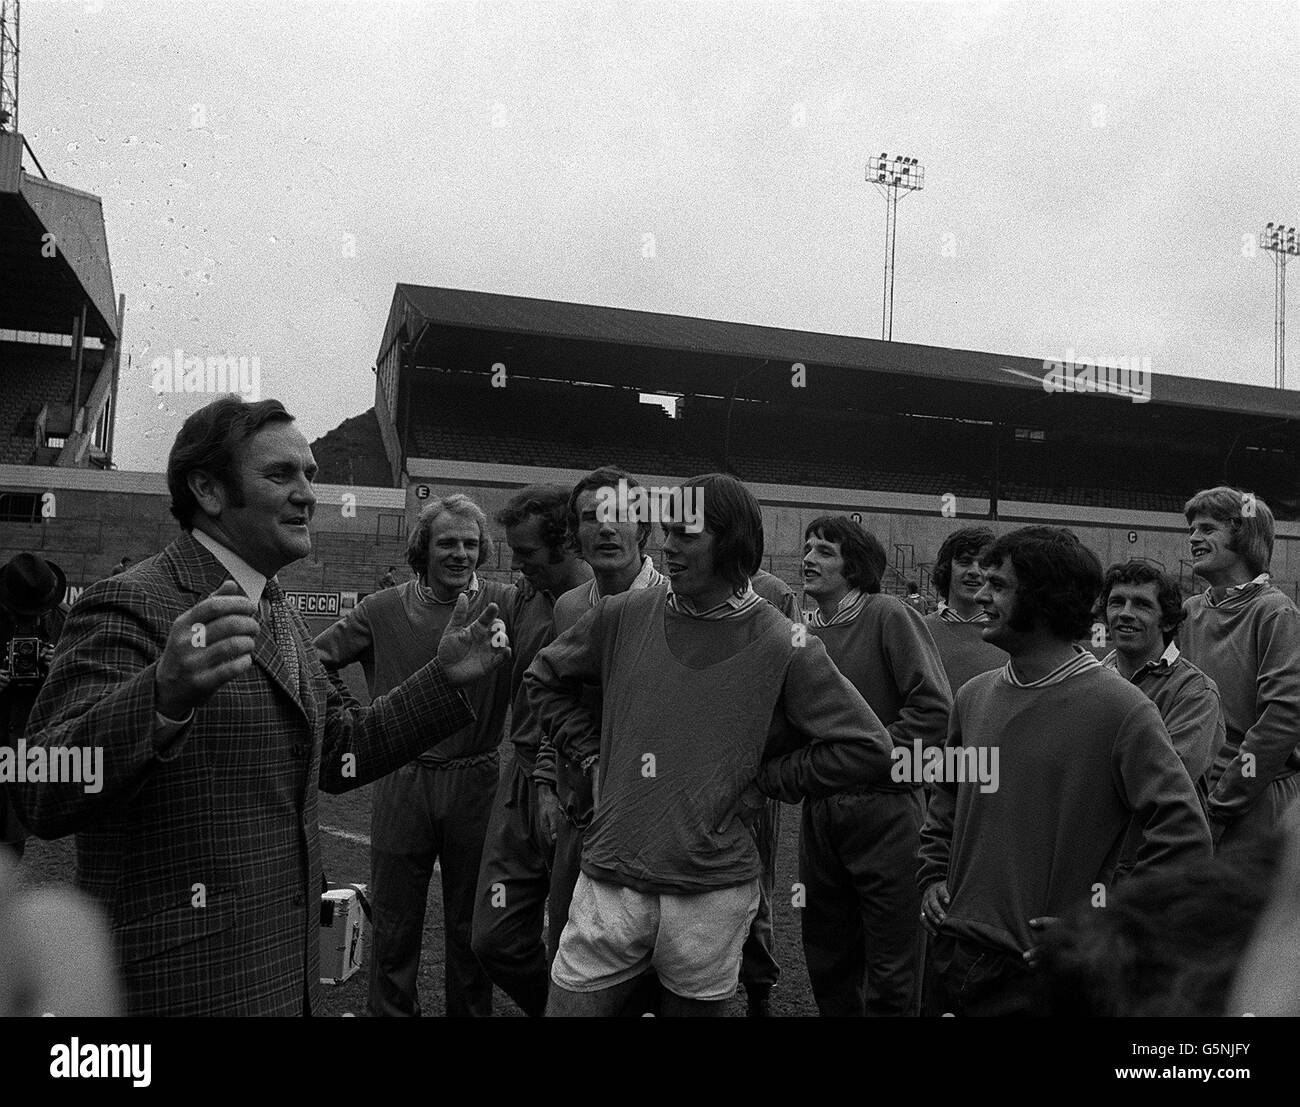 Leeds manager Don Revie leads his players in a rendition of 'Its a grand team to play for' at Elland Road, celebrating winning the league after Arsenal defeated Liverpool at Anfield. Stock Photo